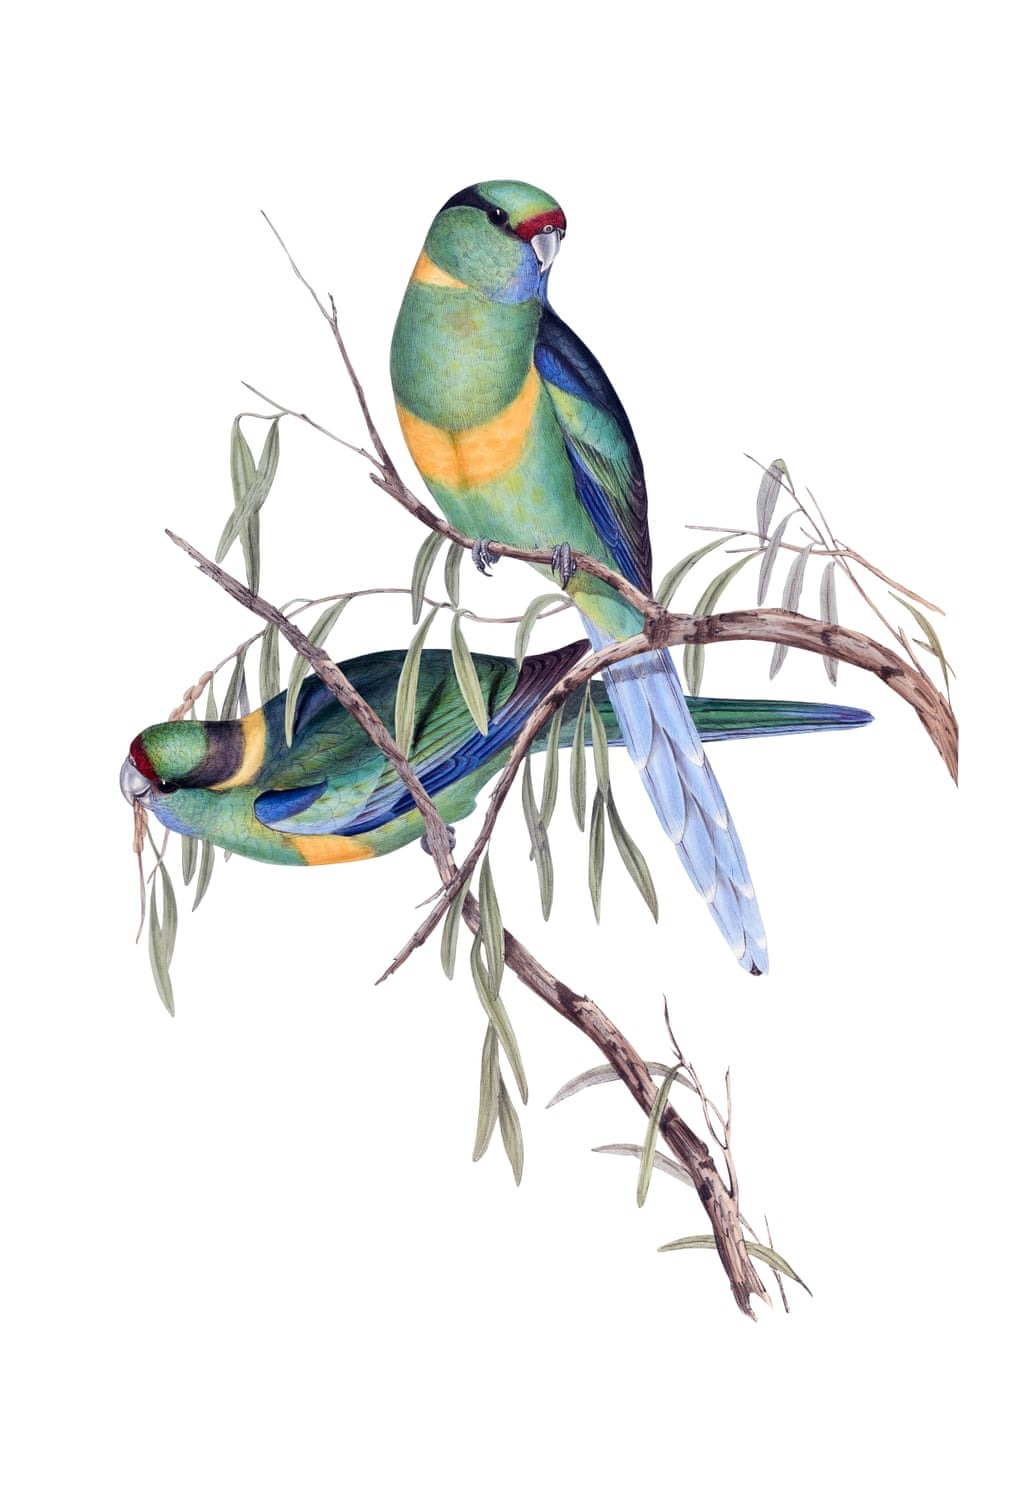 Birds Of Australia, Fascinating Illustrations From The 19th Century By Elizabeth Gould (10)